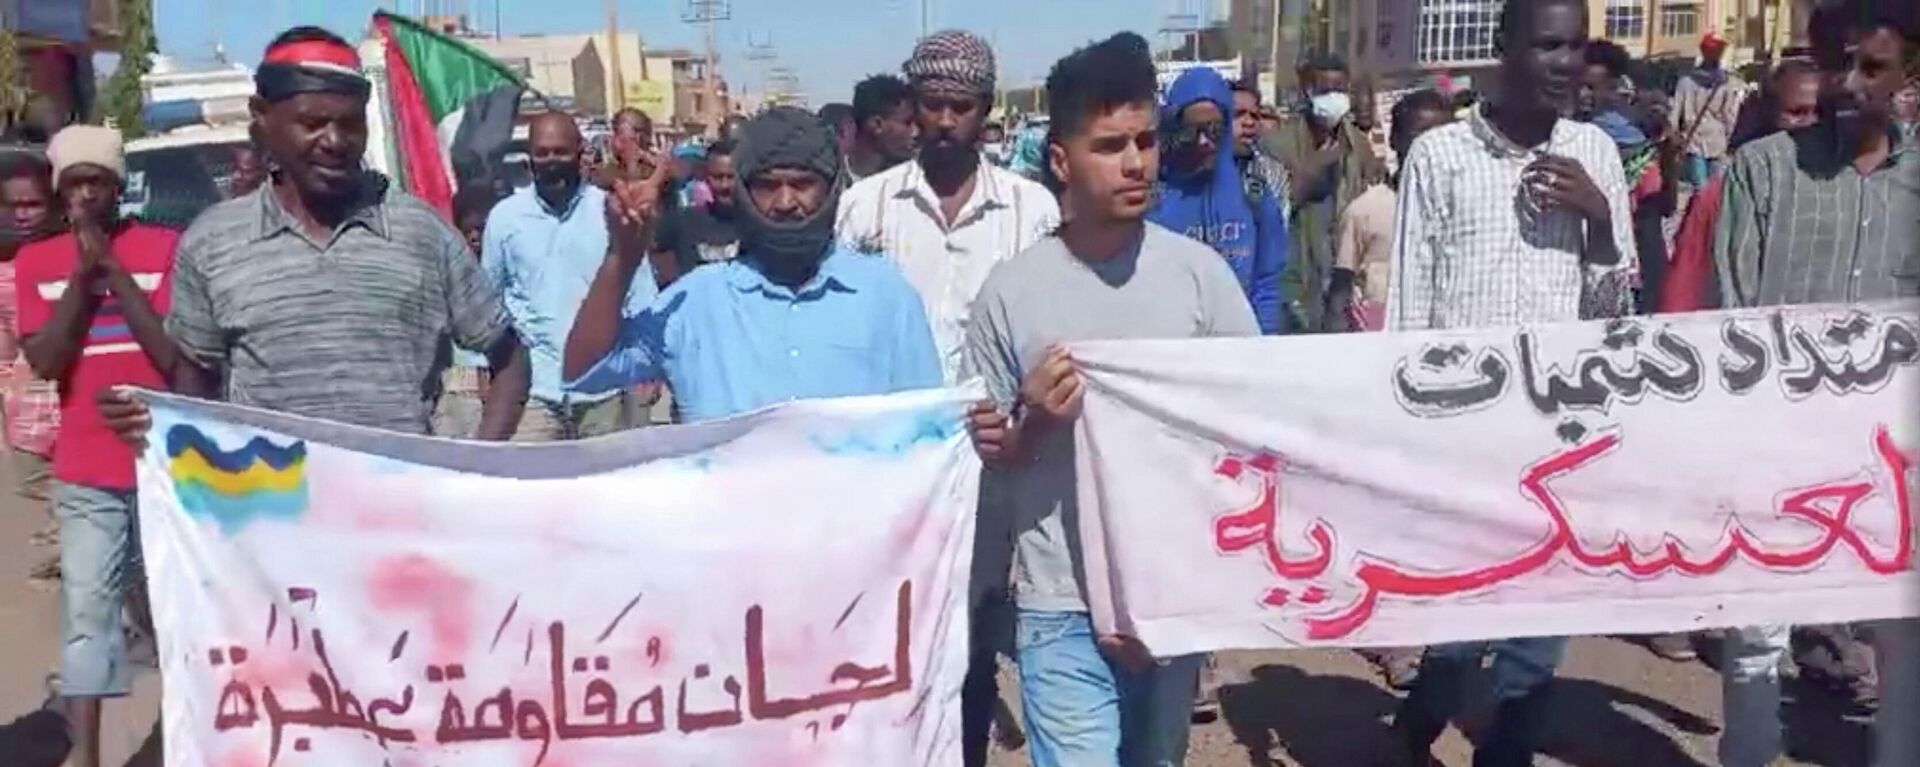 Protesters opposed to military rule carry banners as they march in Khartoum North, Sudan December 30, 2021 in this screengrab obtained from a social media video. - Sputnik International, 1920, 30.12.2021